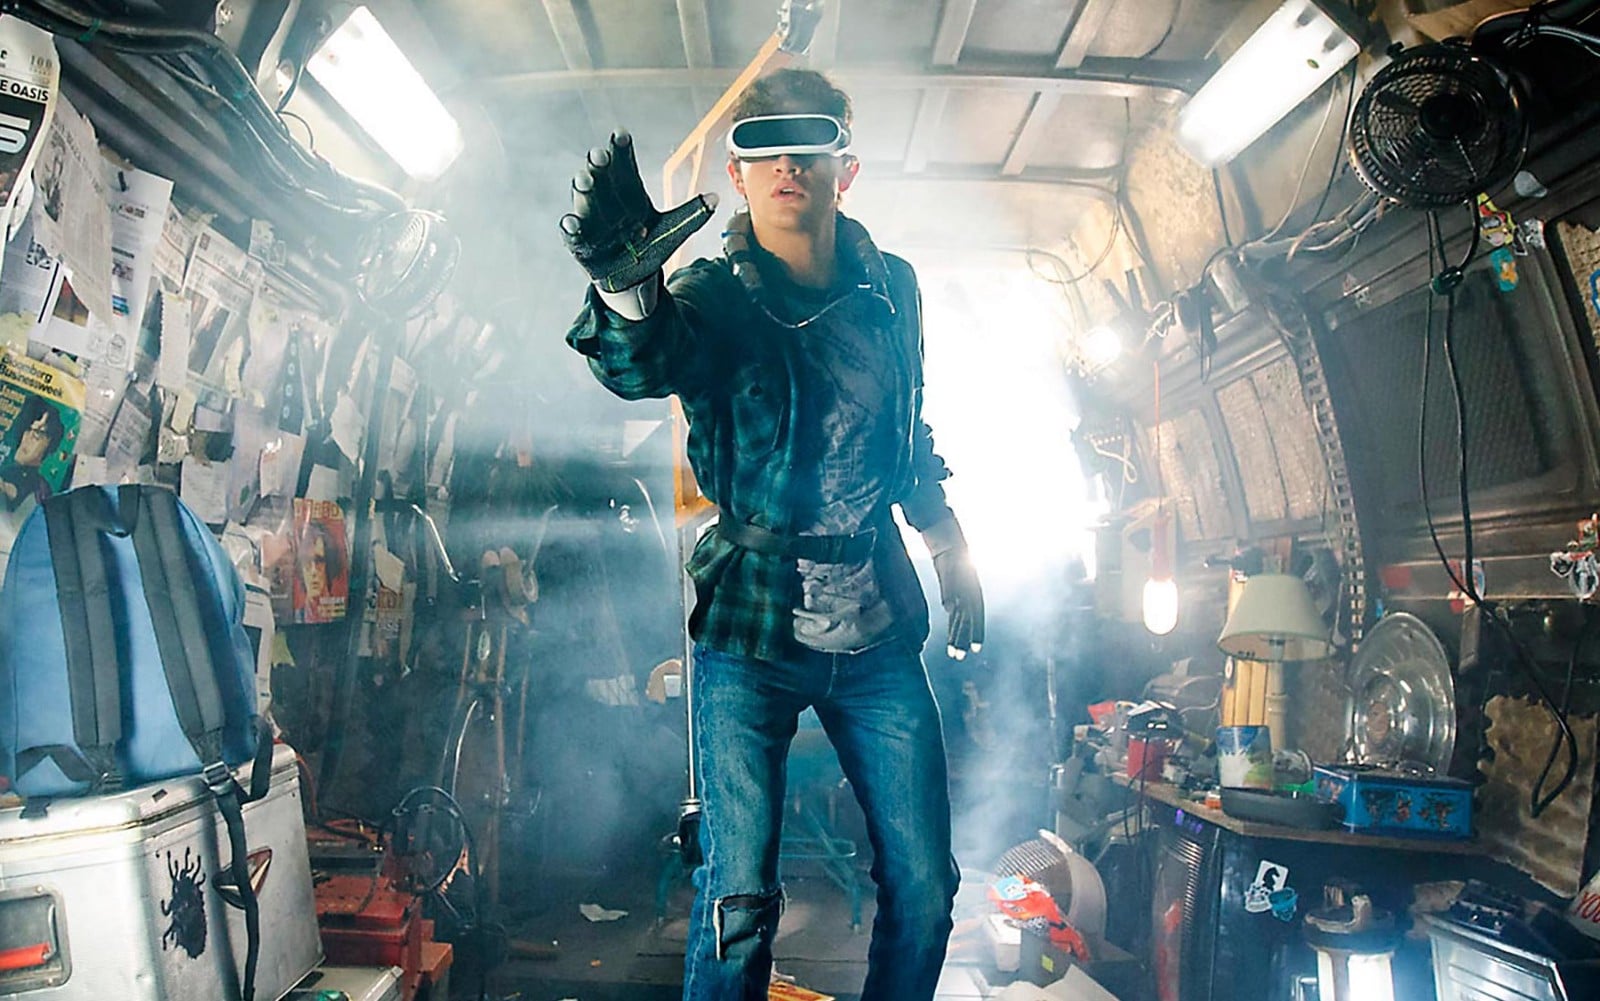 Box Office: Ready Player One is Steven Spielberg's Best Opening in a Decade